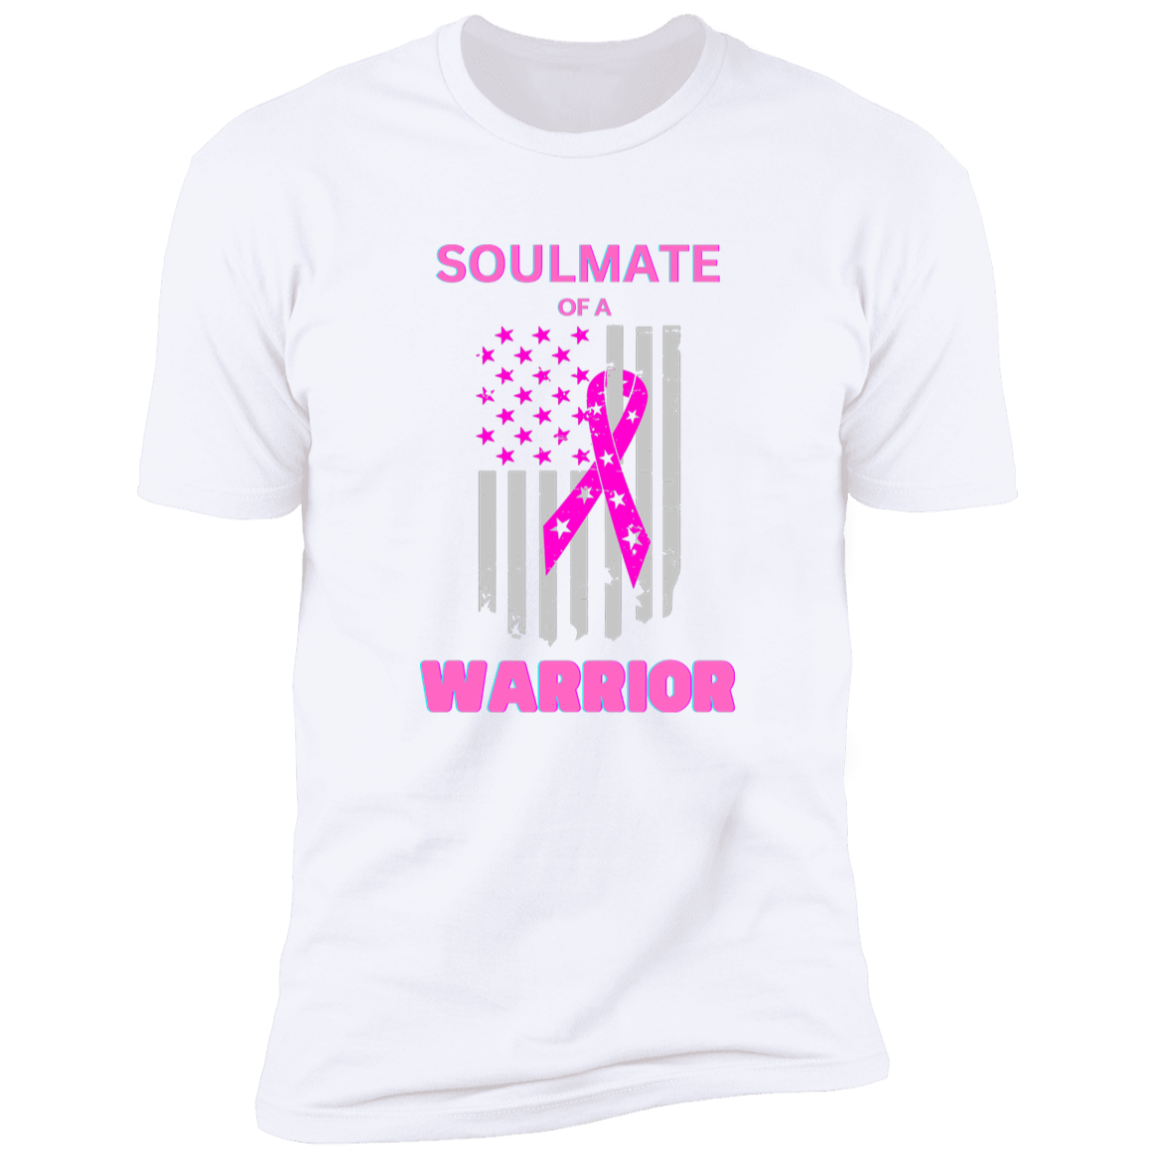 Soulmate of A Warrior